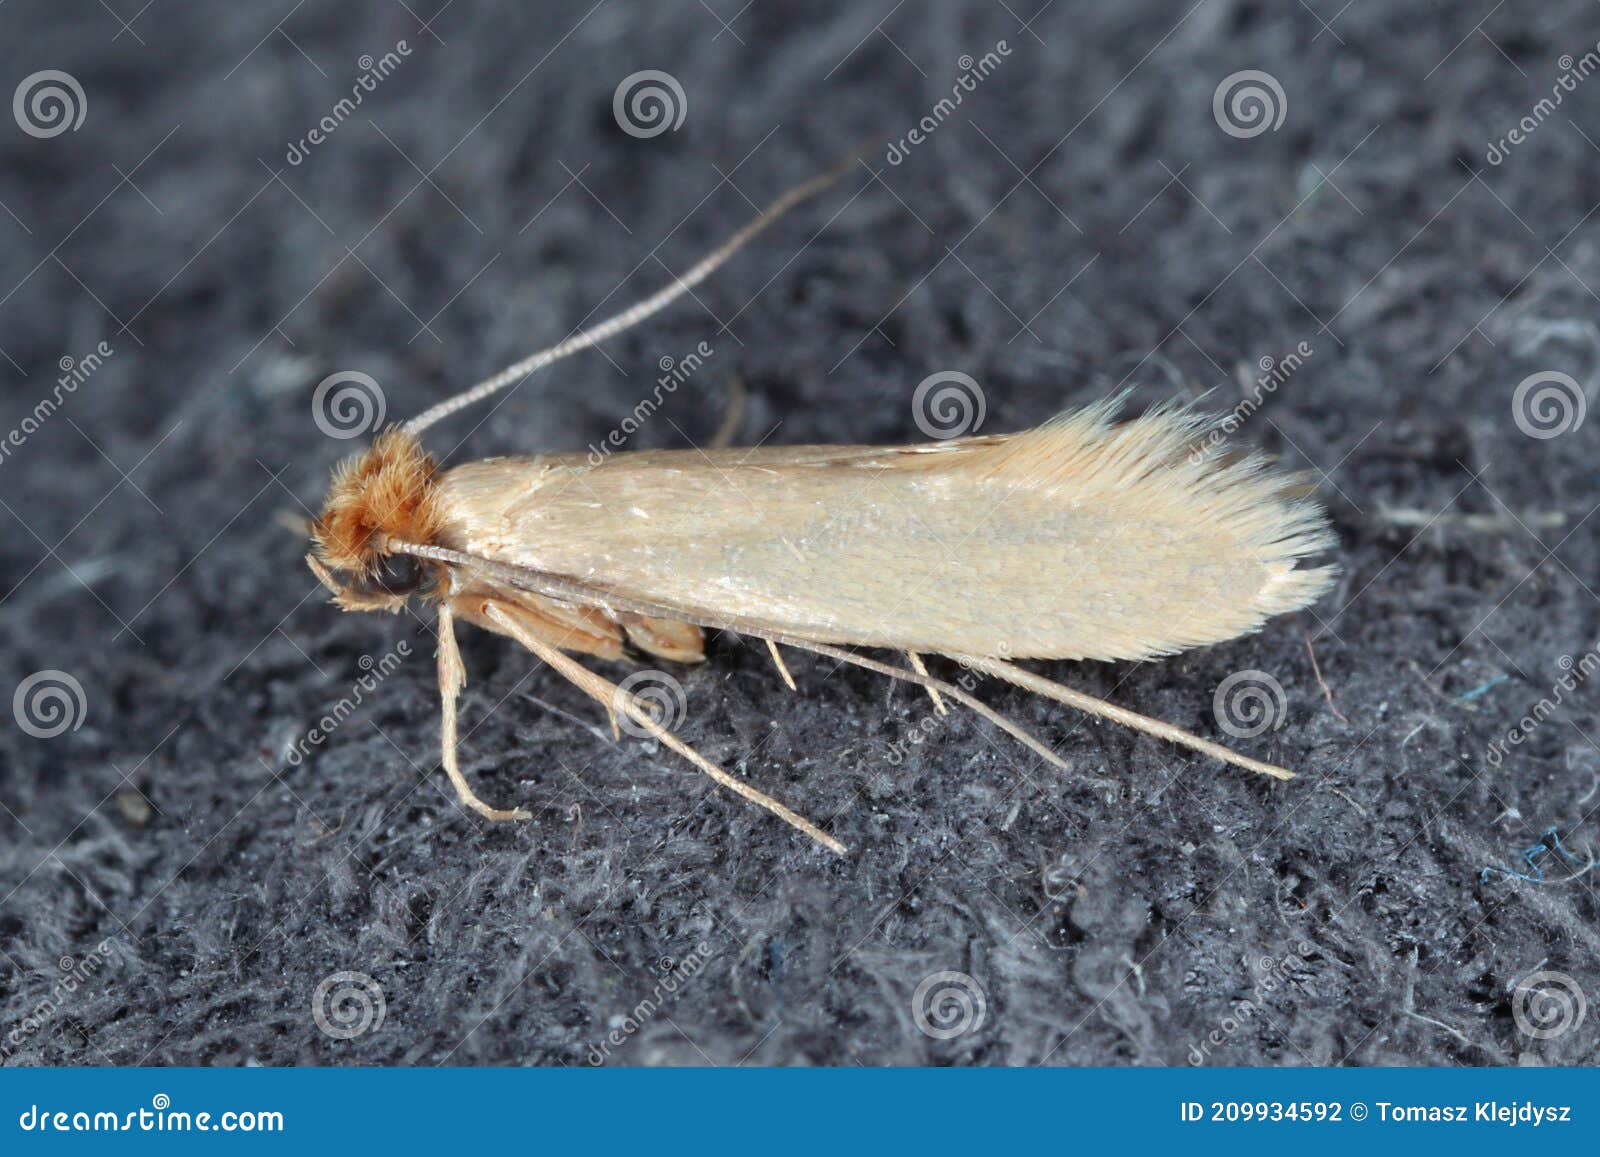 https://thumbs.dreamstime.com/z/tineola-bisselliella-known-as-common-clothes-moth-webbing-simply-clothing-pest-homes-209934592.jpg